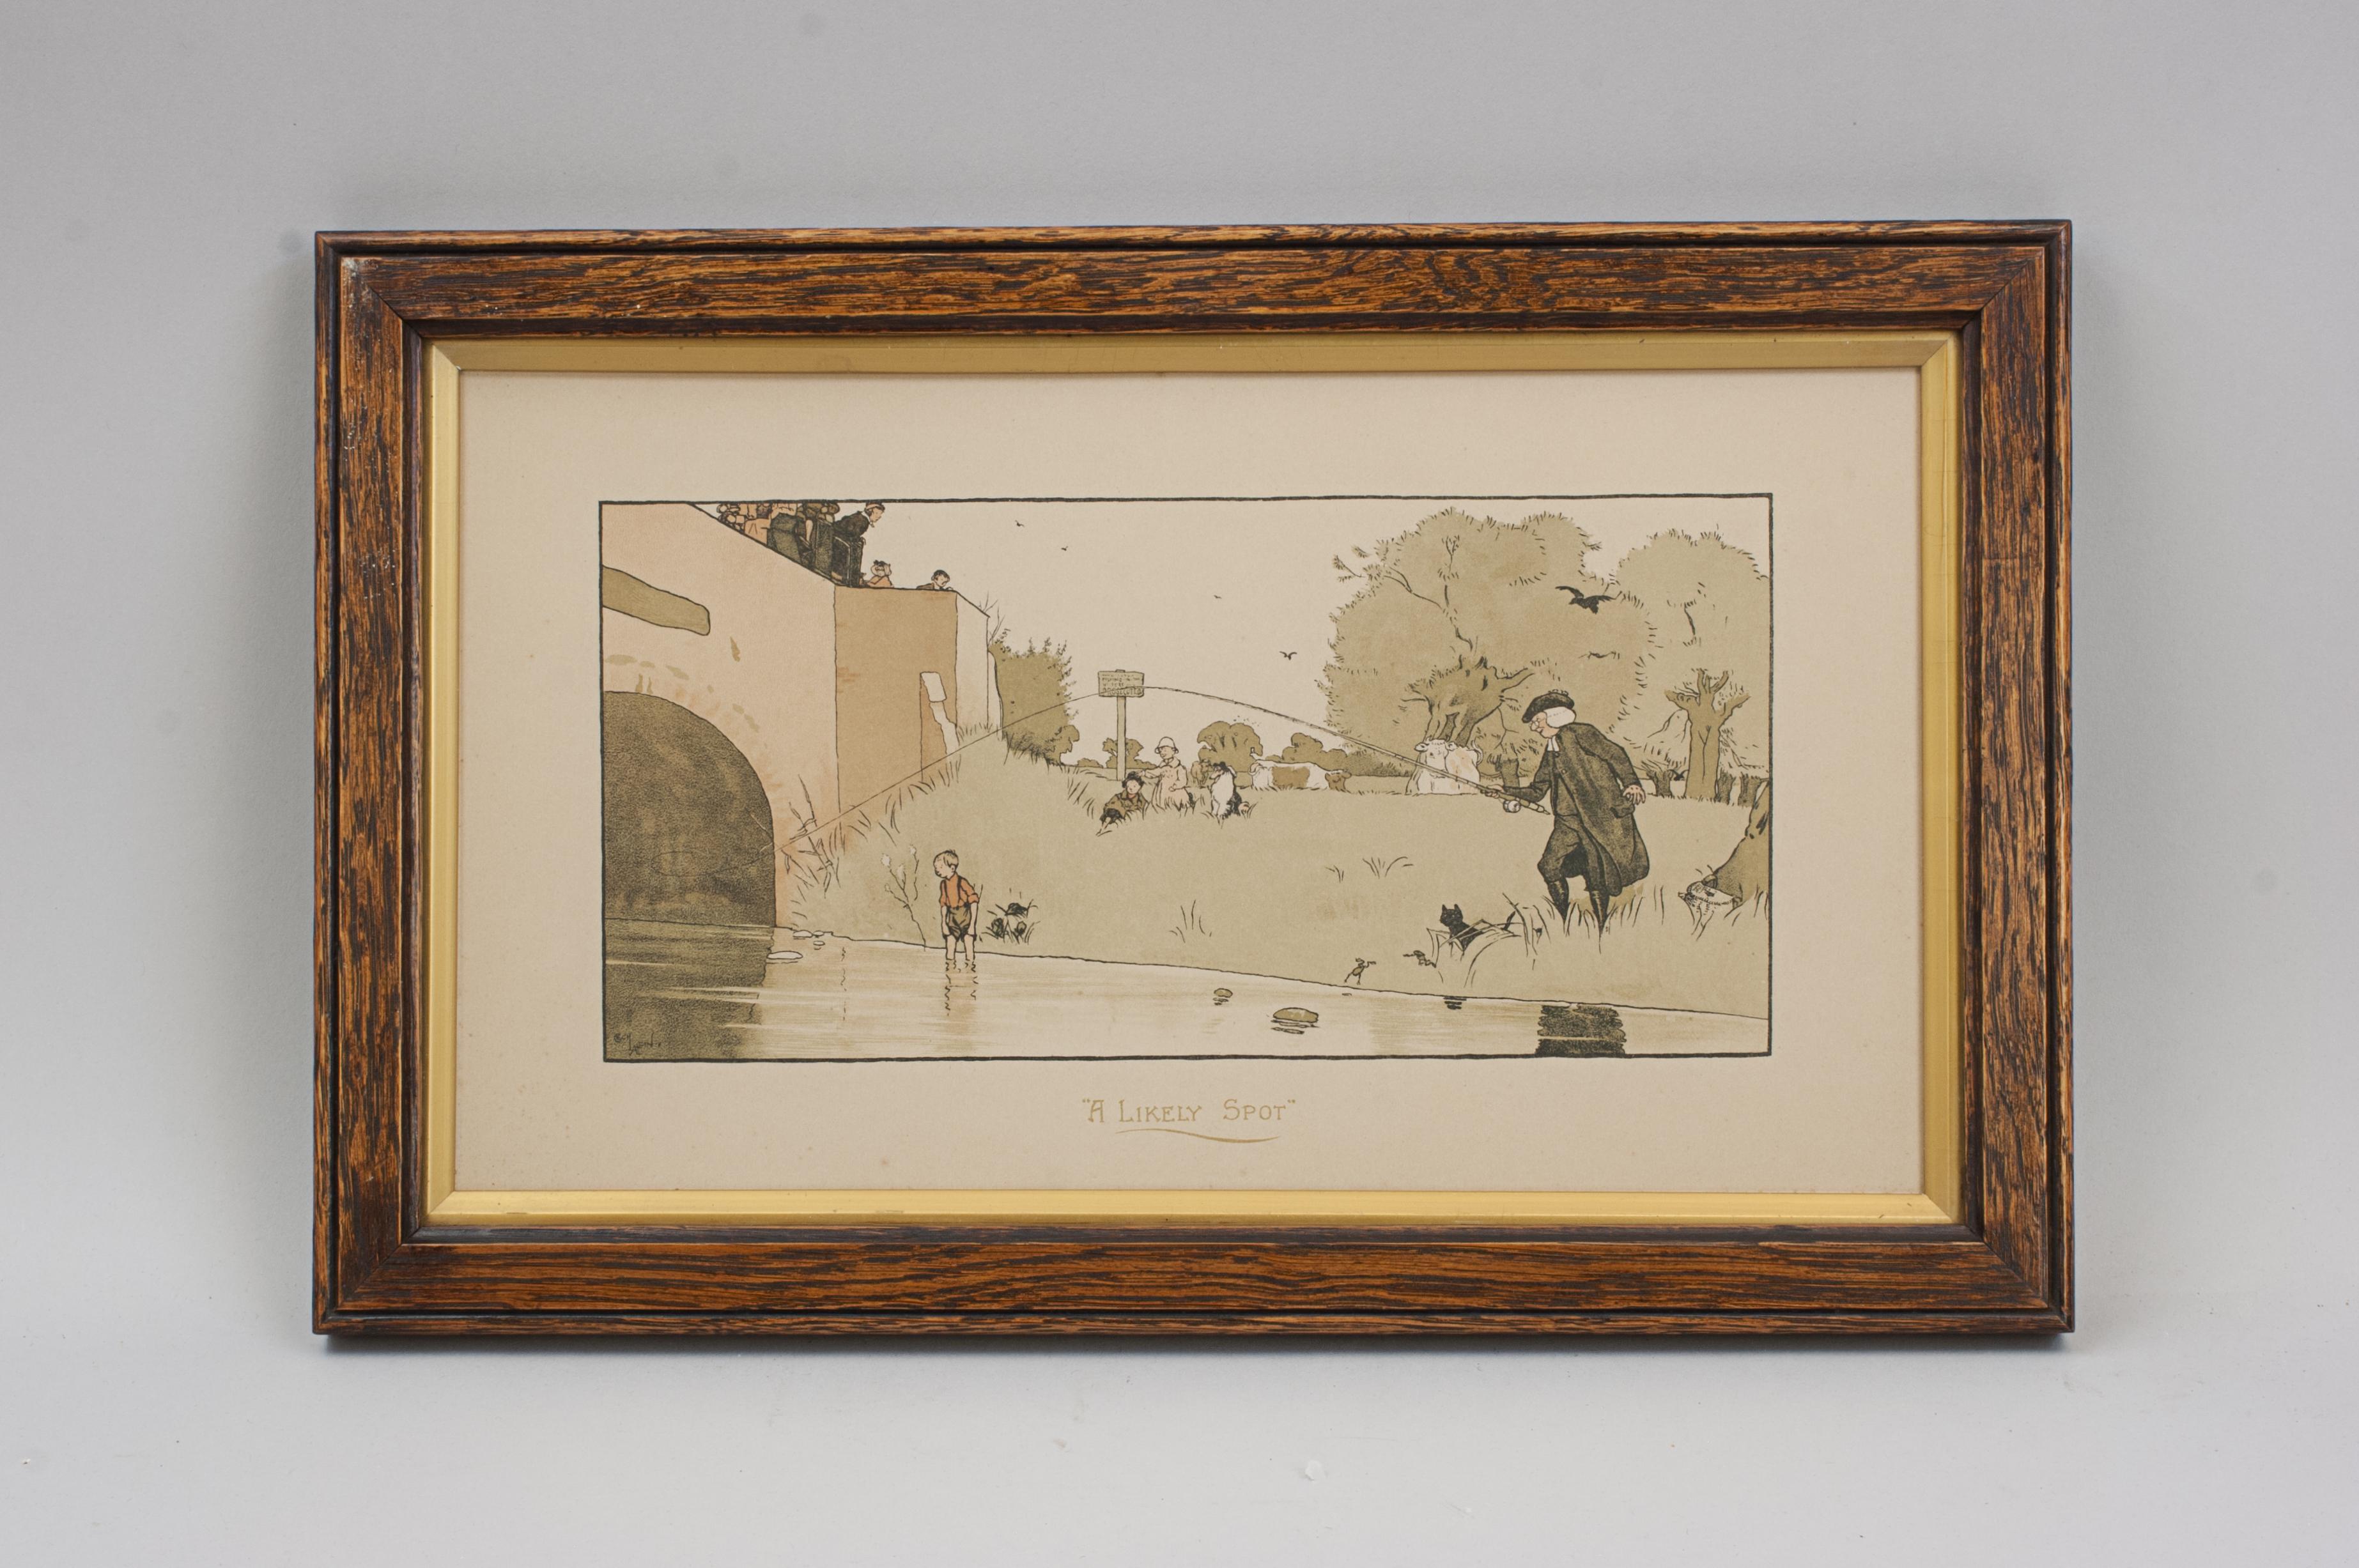 Vintage Fishing Print By Cecil Aldin, A Likely Spot.
A wonderful original fishing chromolithograph print by Cecil Aldin titled 'A LIKELY SPOT' (small version). The picture is in the original oak frame with gold slip. The scene is of a parson and boy